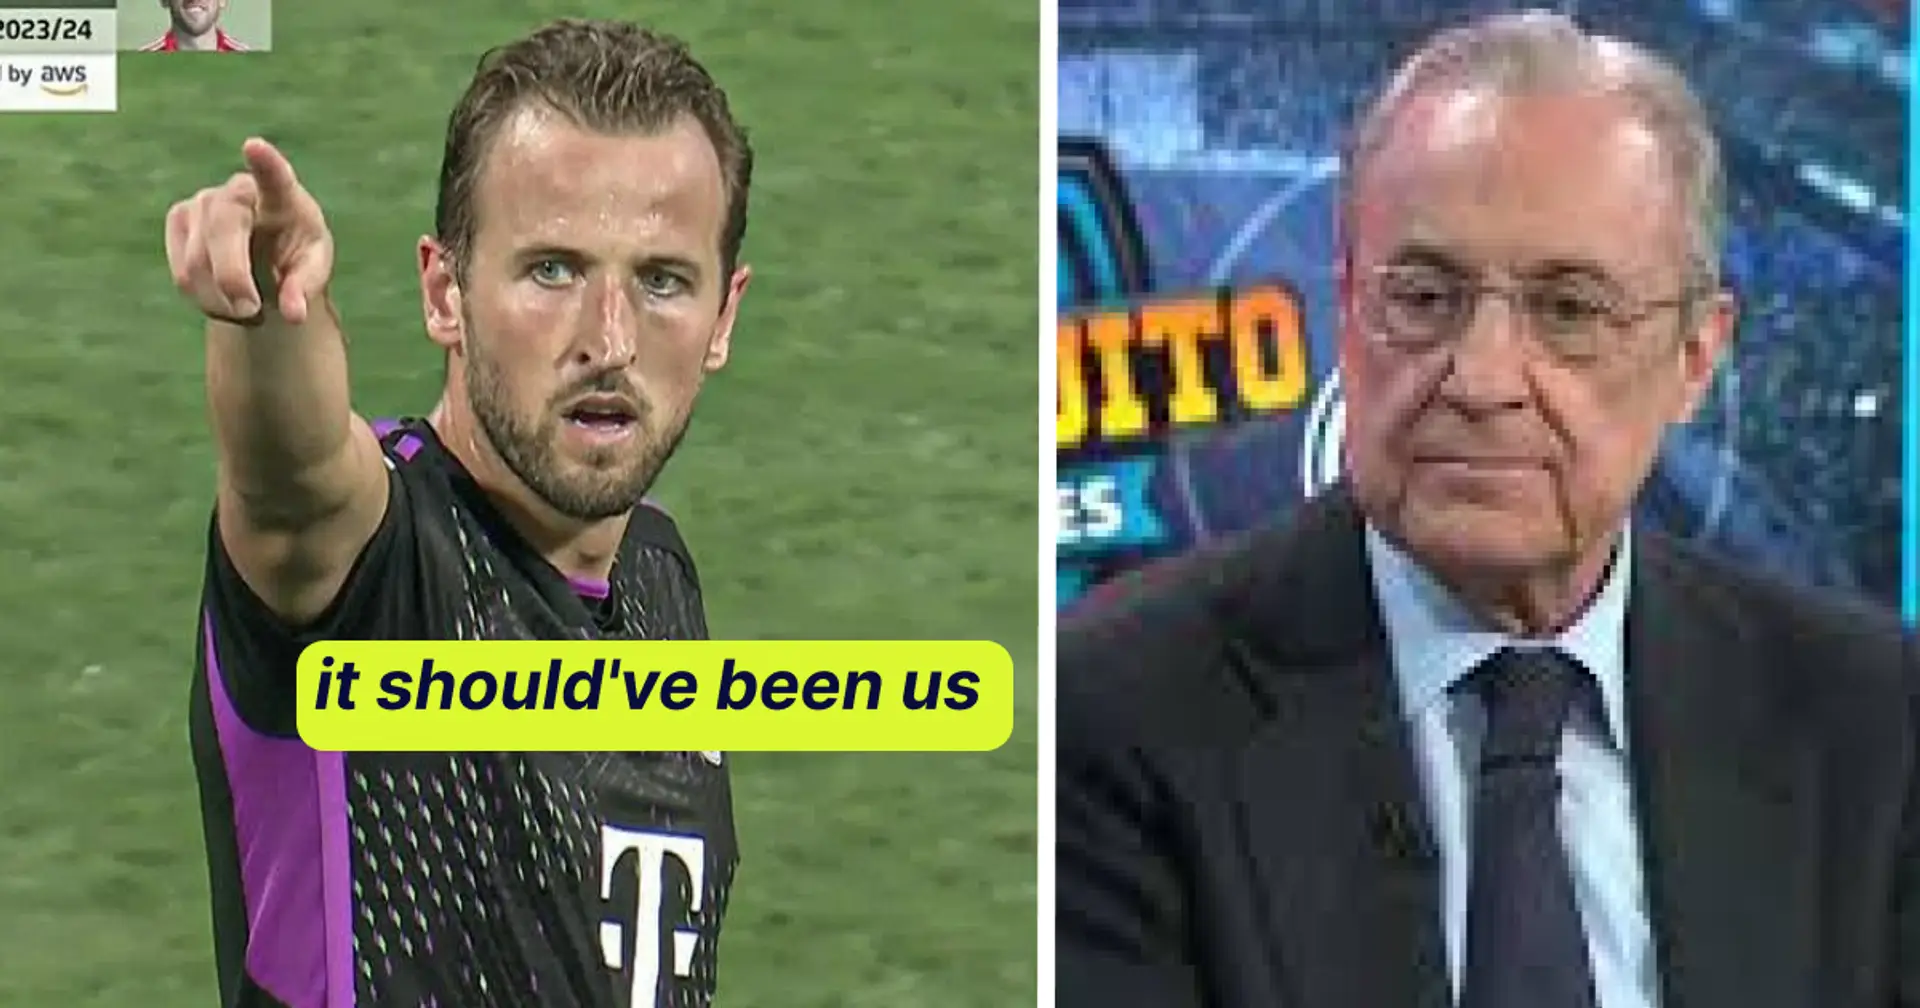 'If only we weren't obsessed: Real Madrid fan expresses regret as Kane scores on Bayern debut